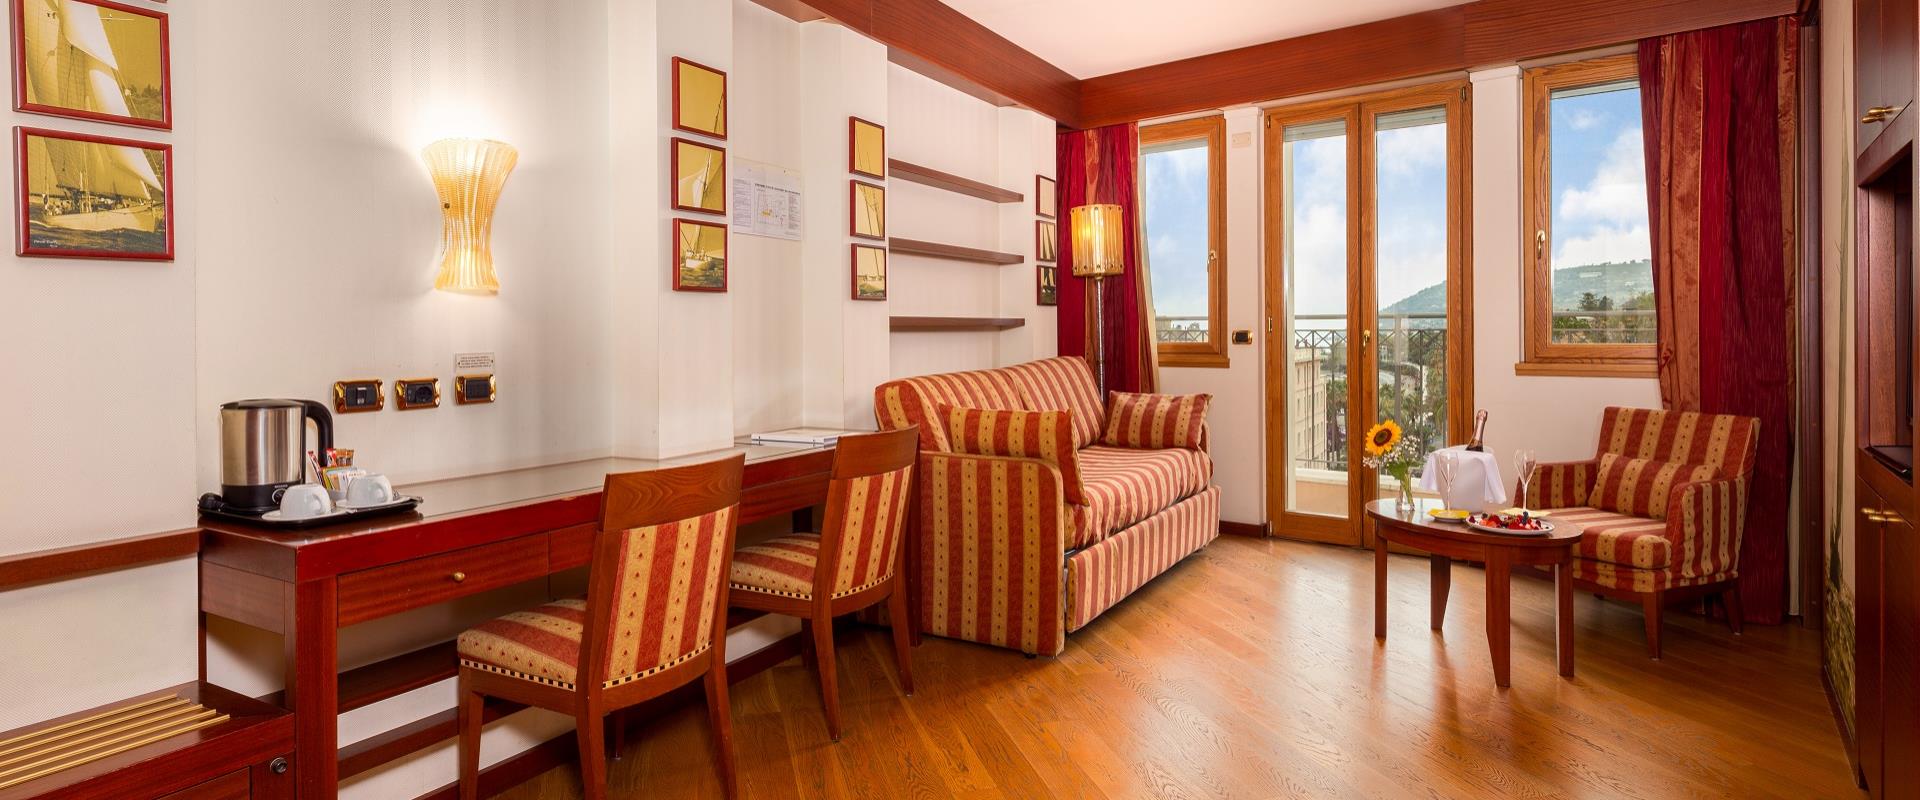 All the comfort you want in our Sanremo hotel suite